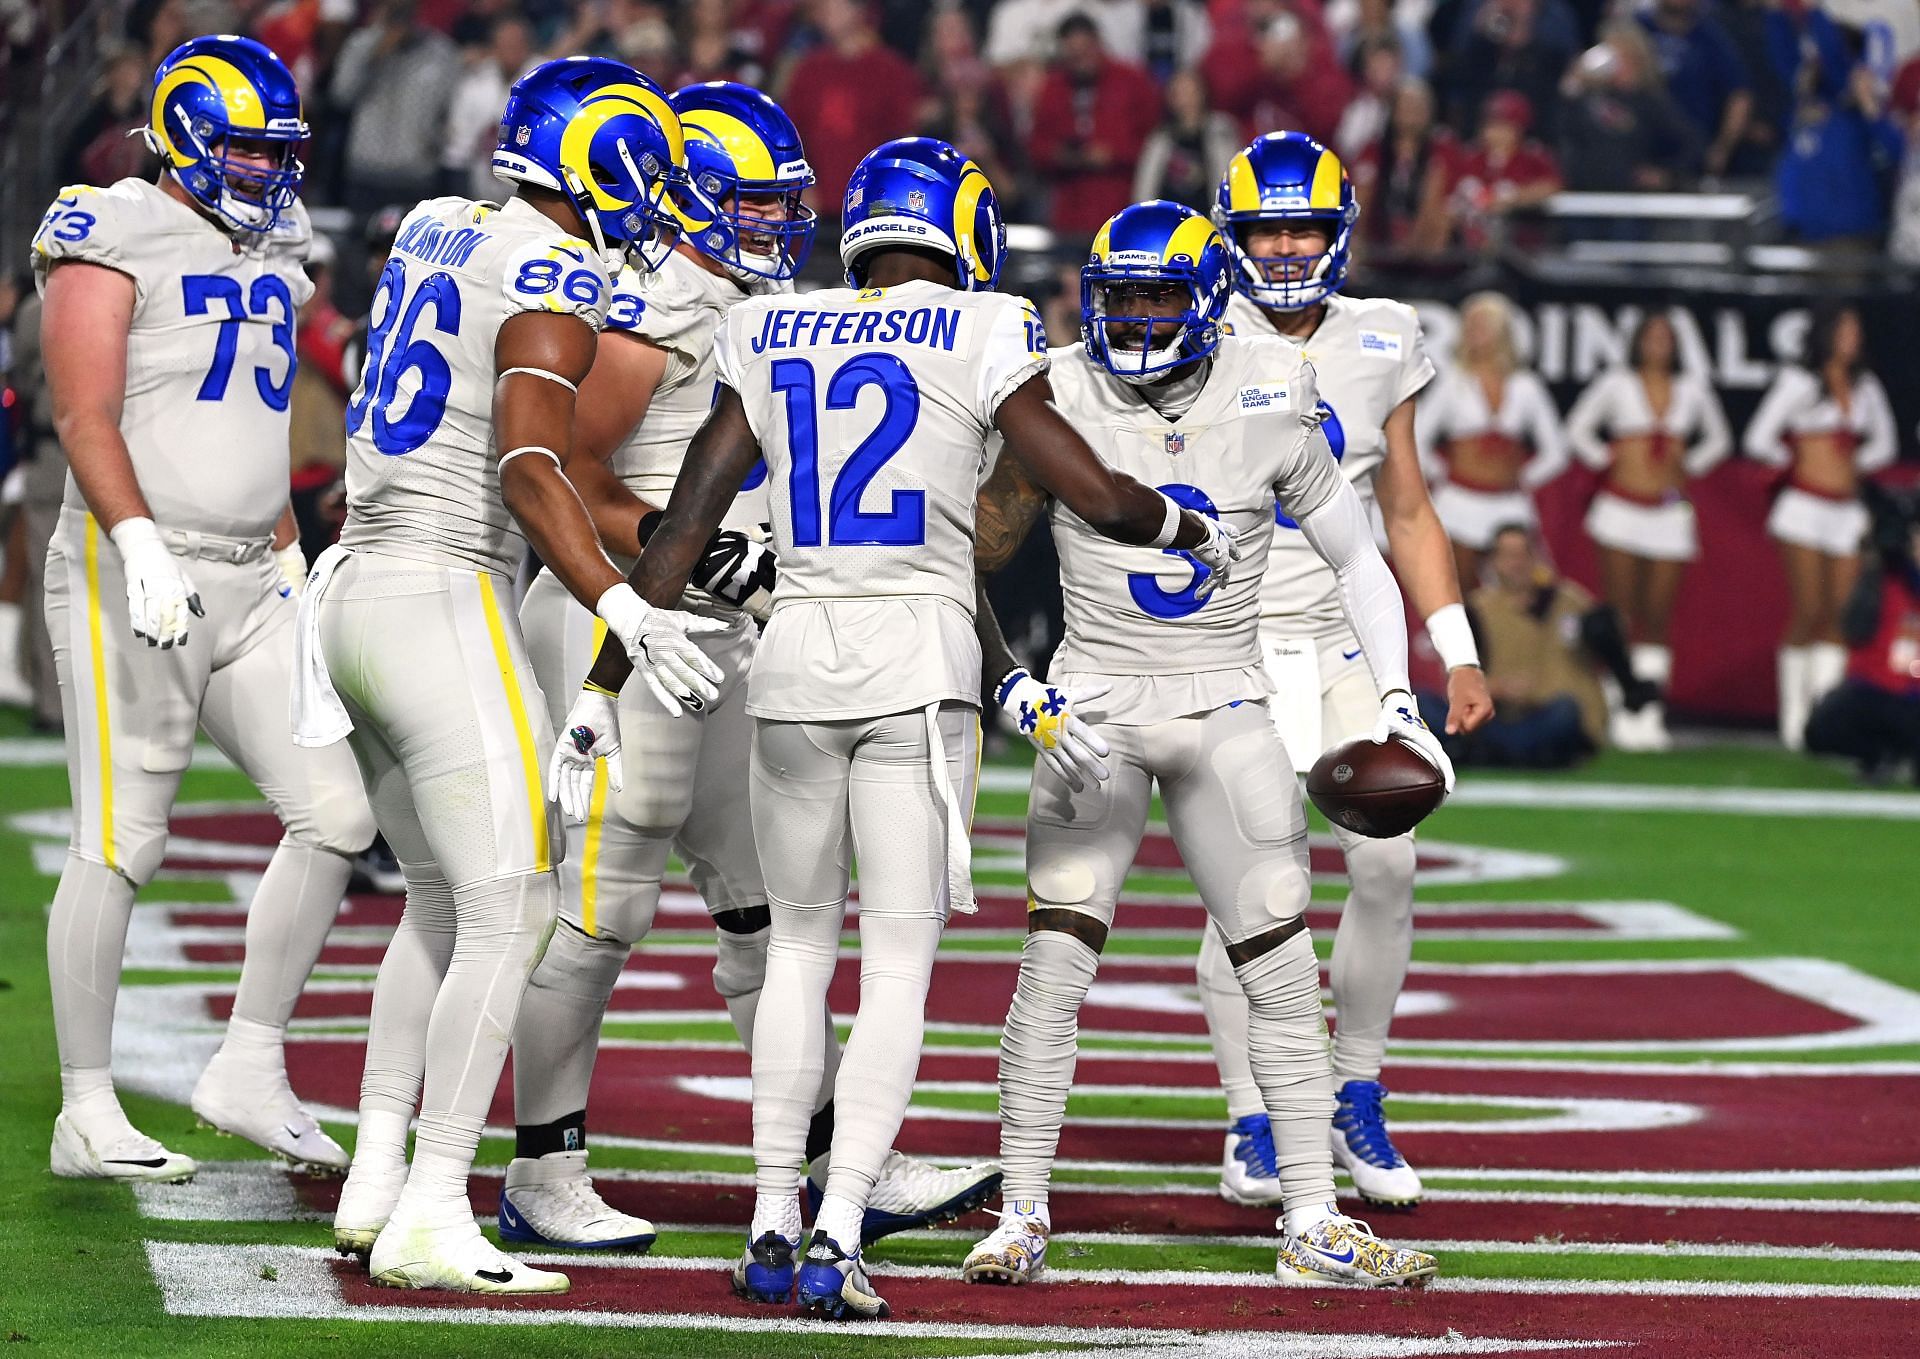 Odell Beckham Jr. celebrates with his teammates after a touchdown in Week 14.